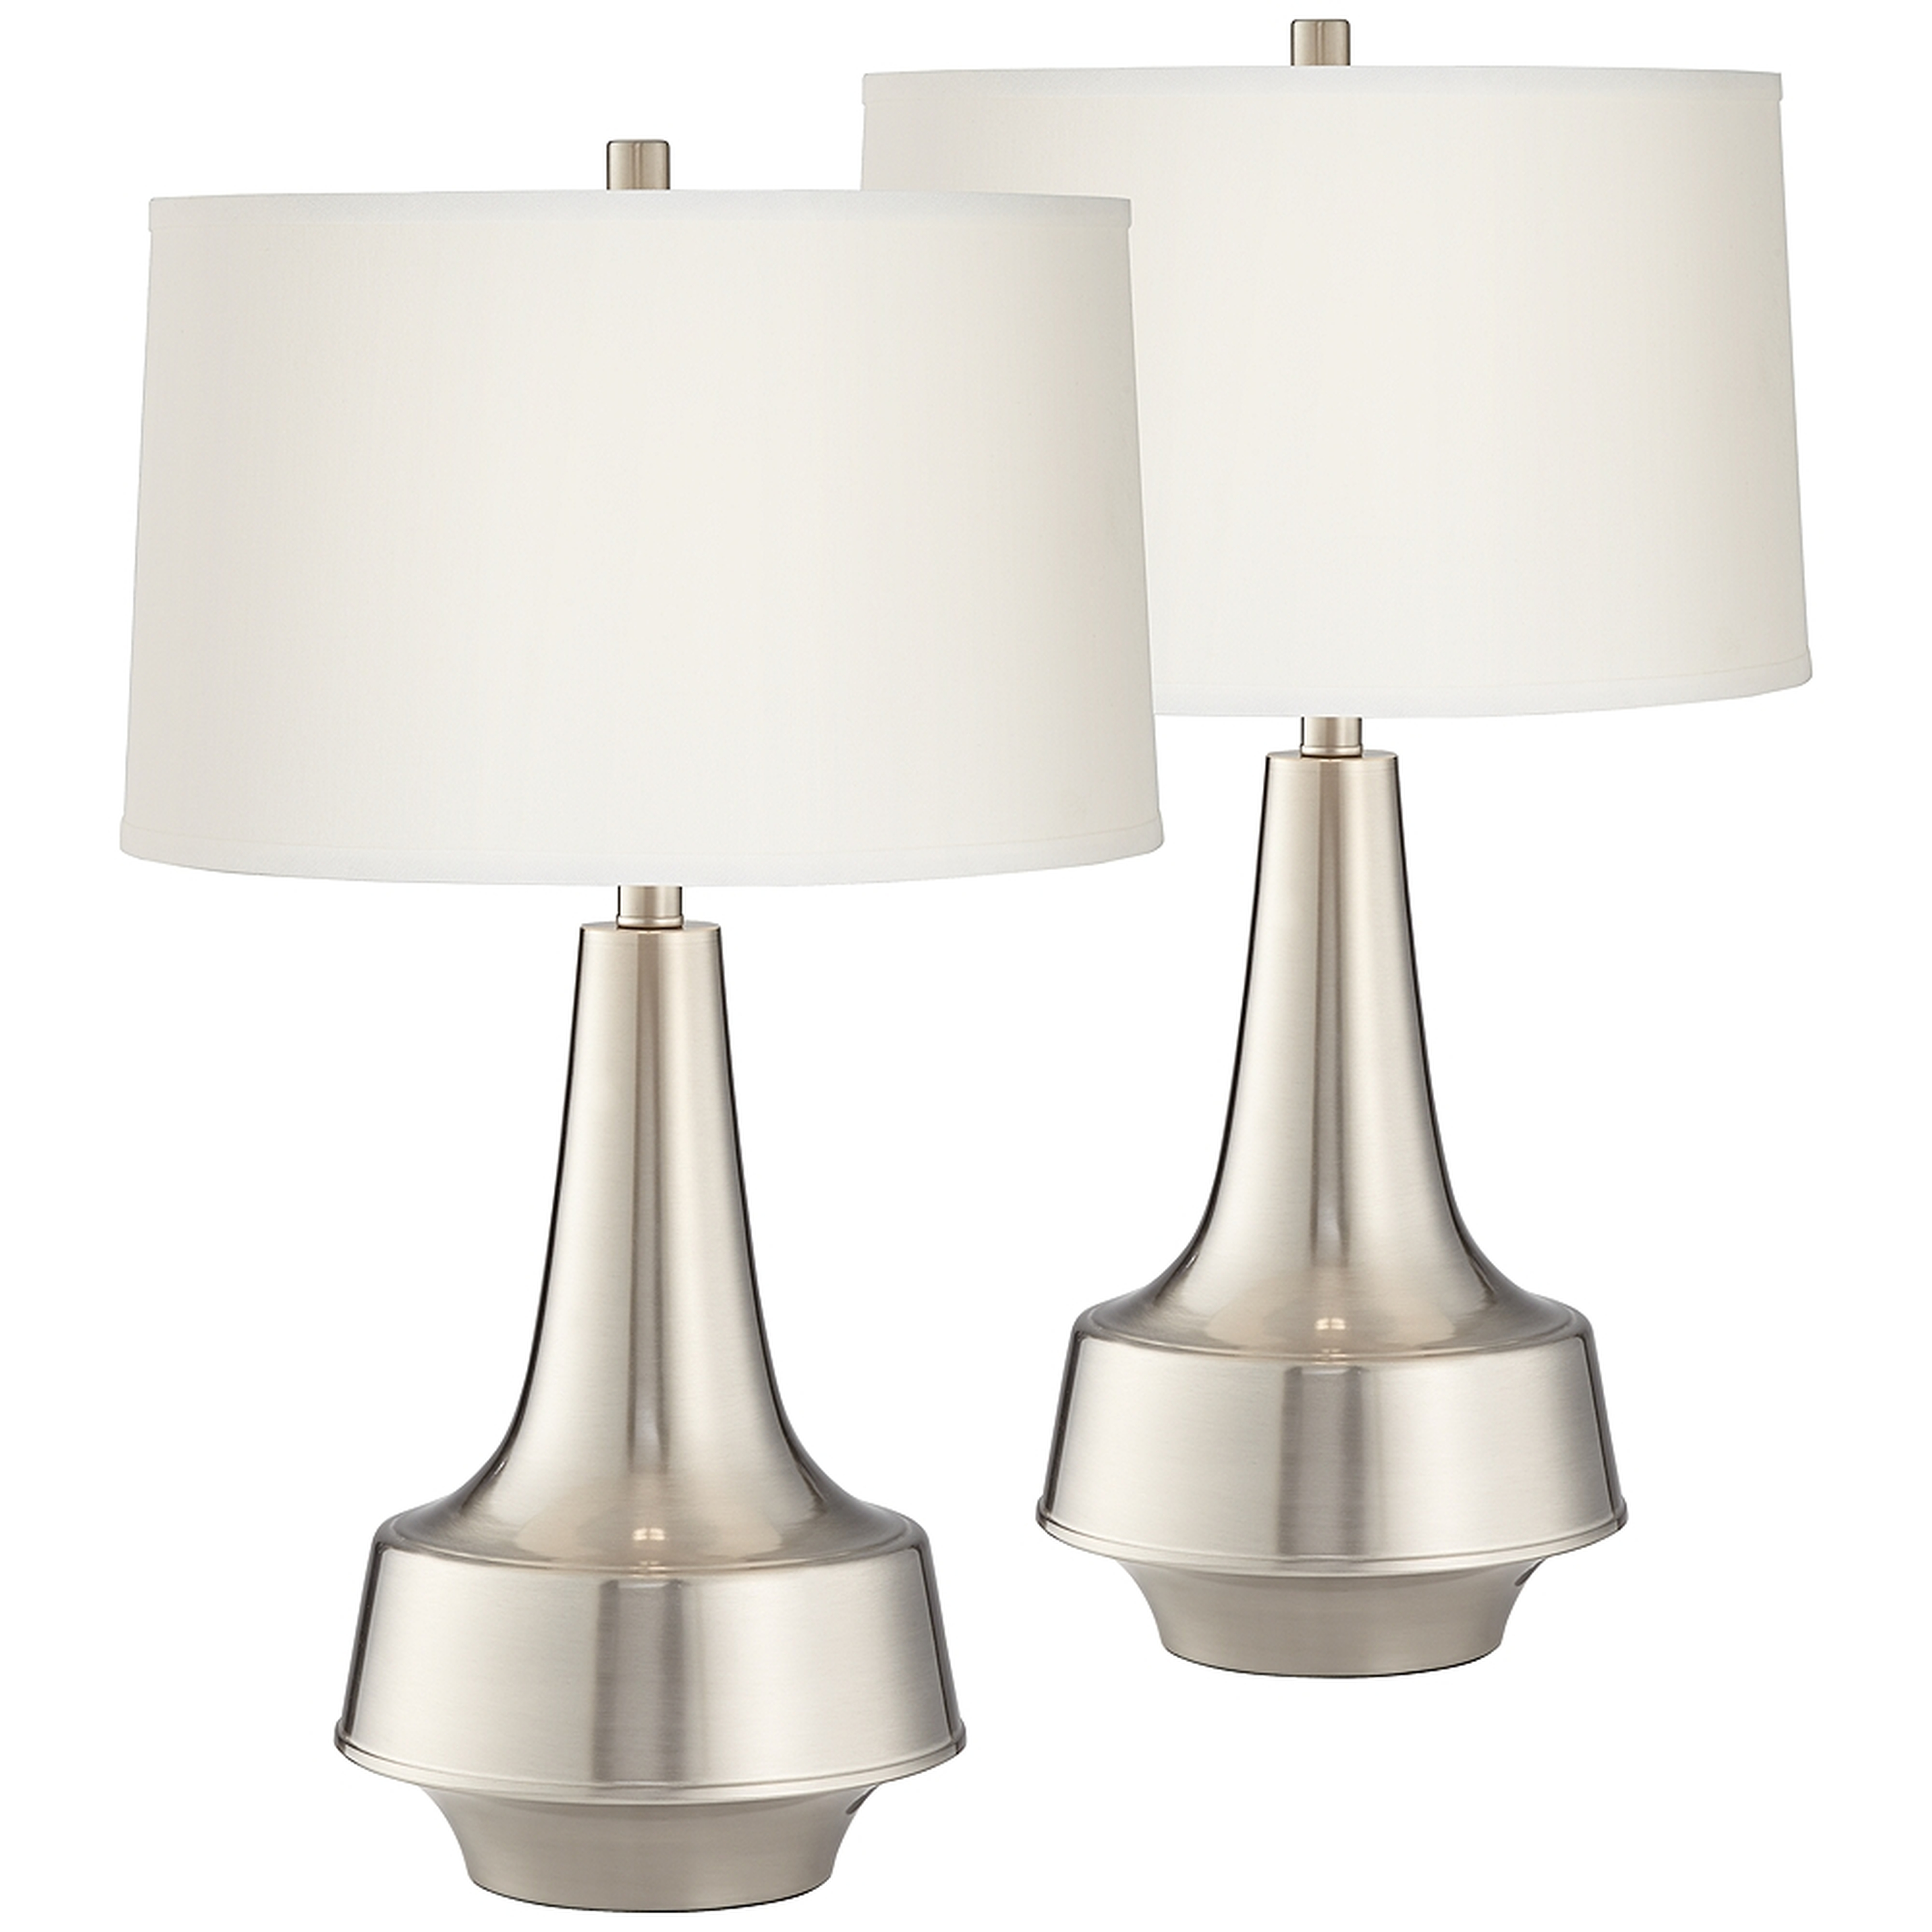 Argo Brushed Nickel Metal Table Lamps Set of 2 - Style # 60M87 - Lamps Plus